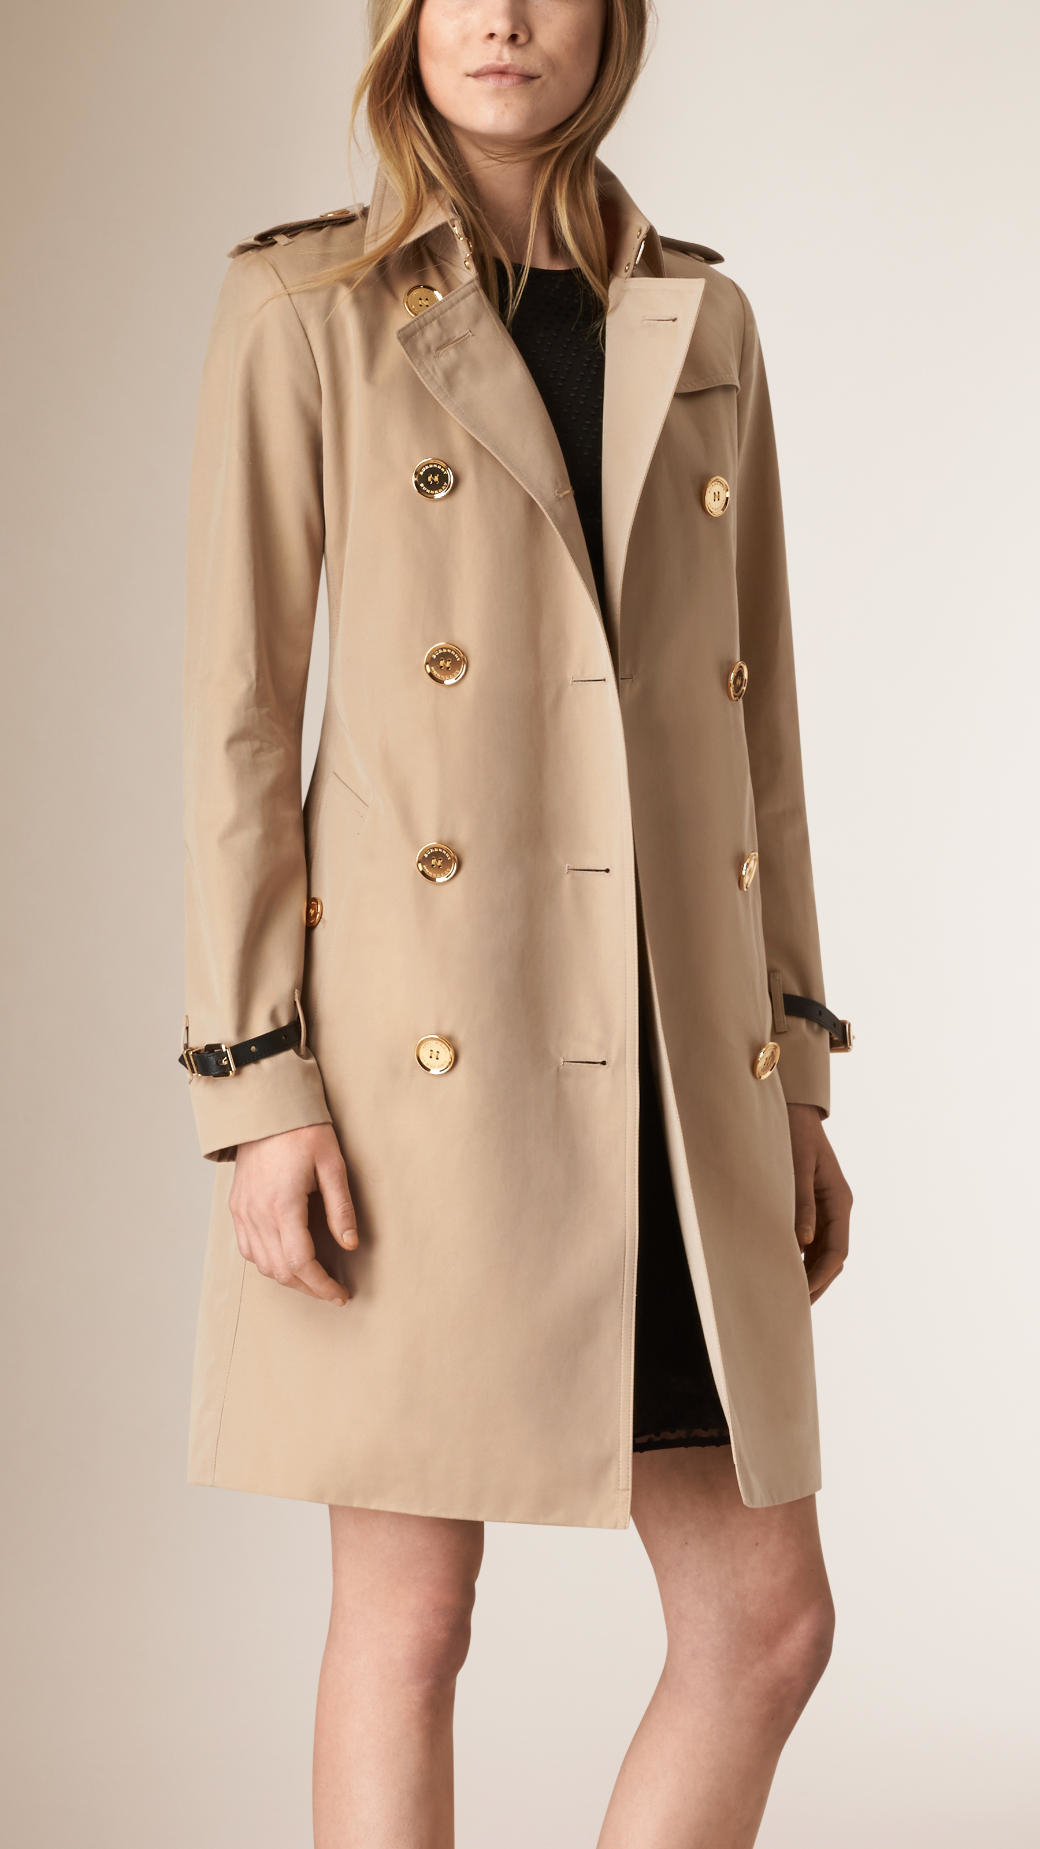 Burberry Trench Coat Gold Buttons Greece, SAVE 45% - eagleflair.com